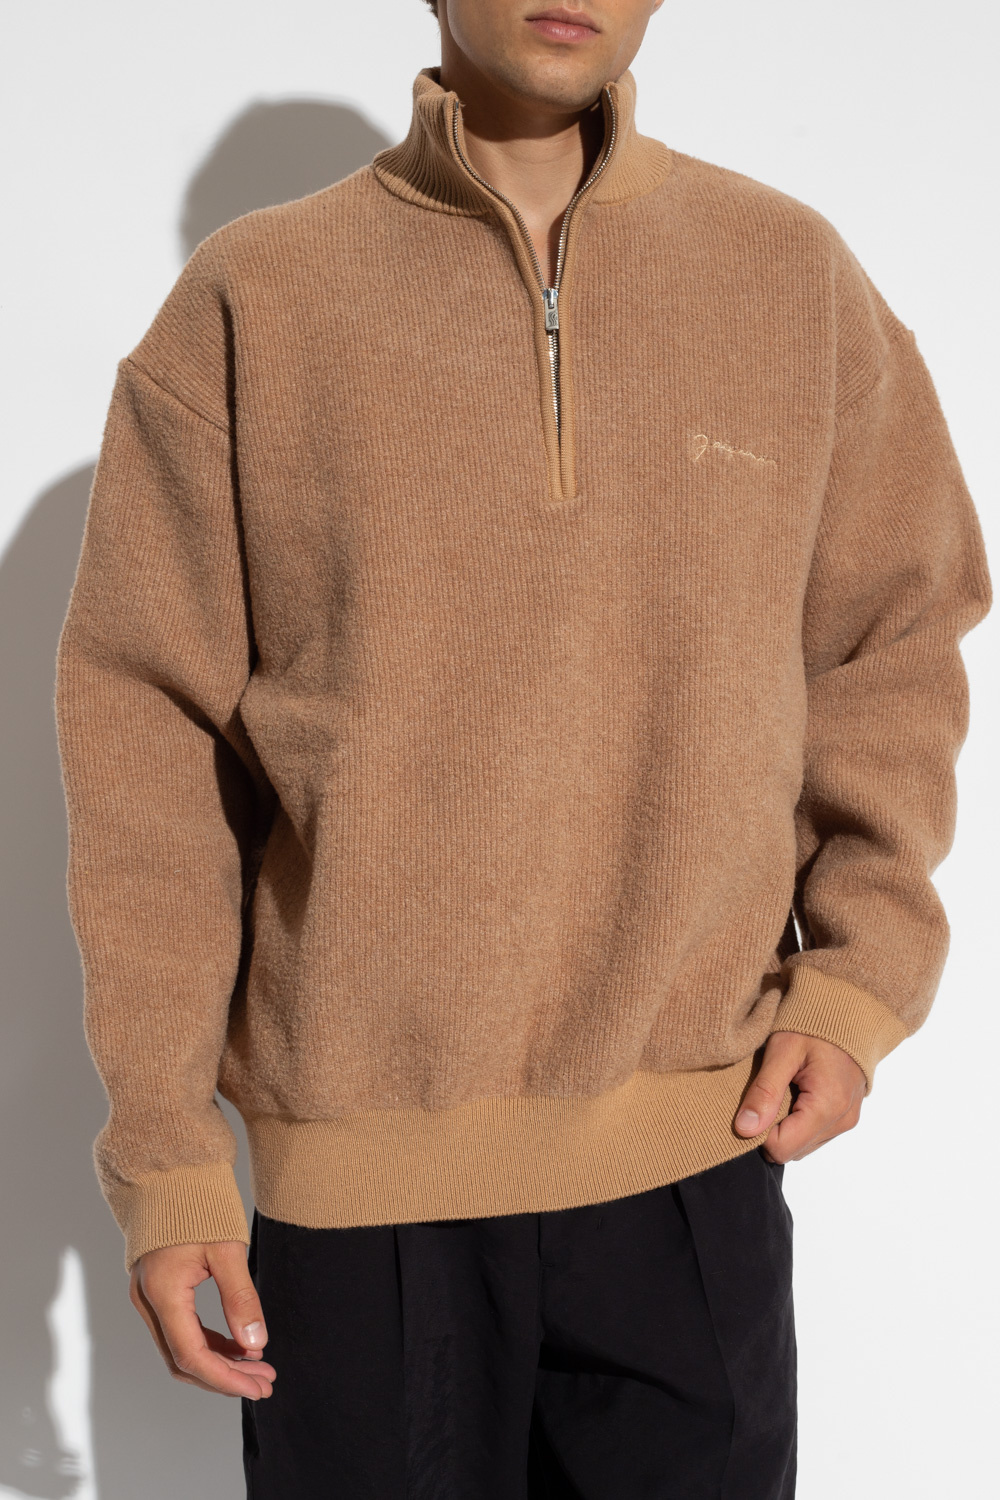 Jacquemus ‘Berger’ dry sweater with logo